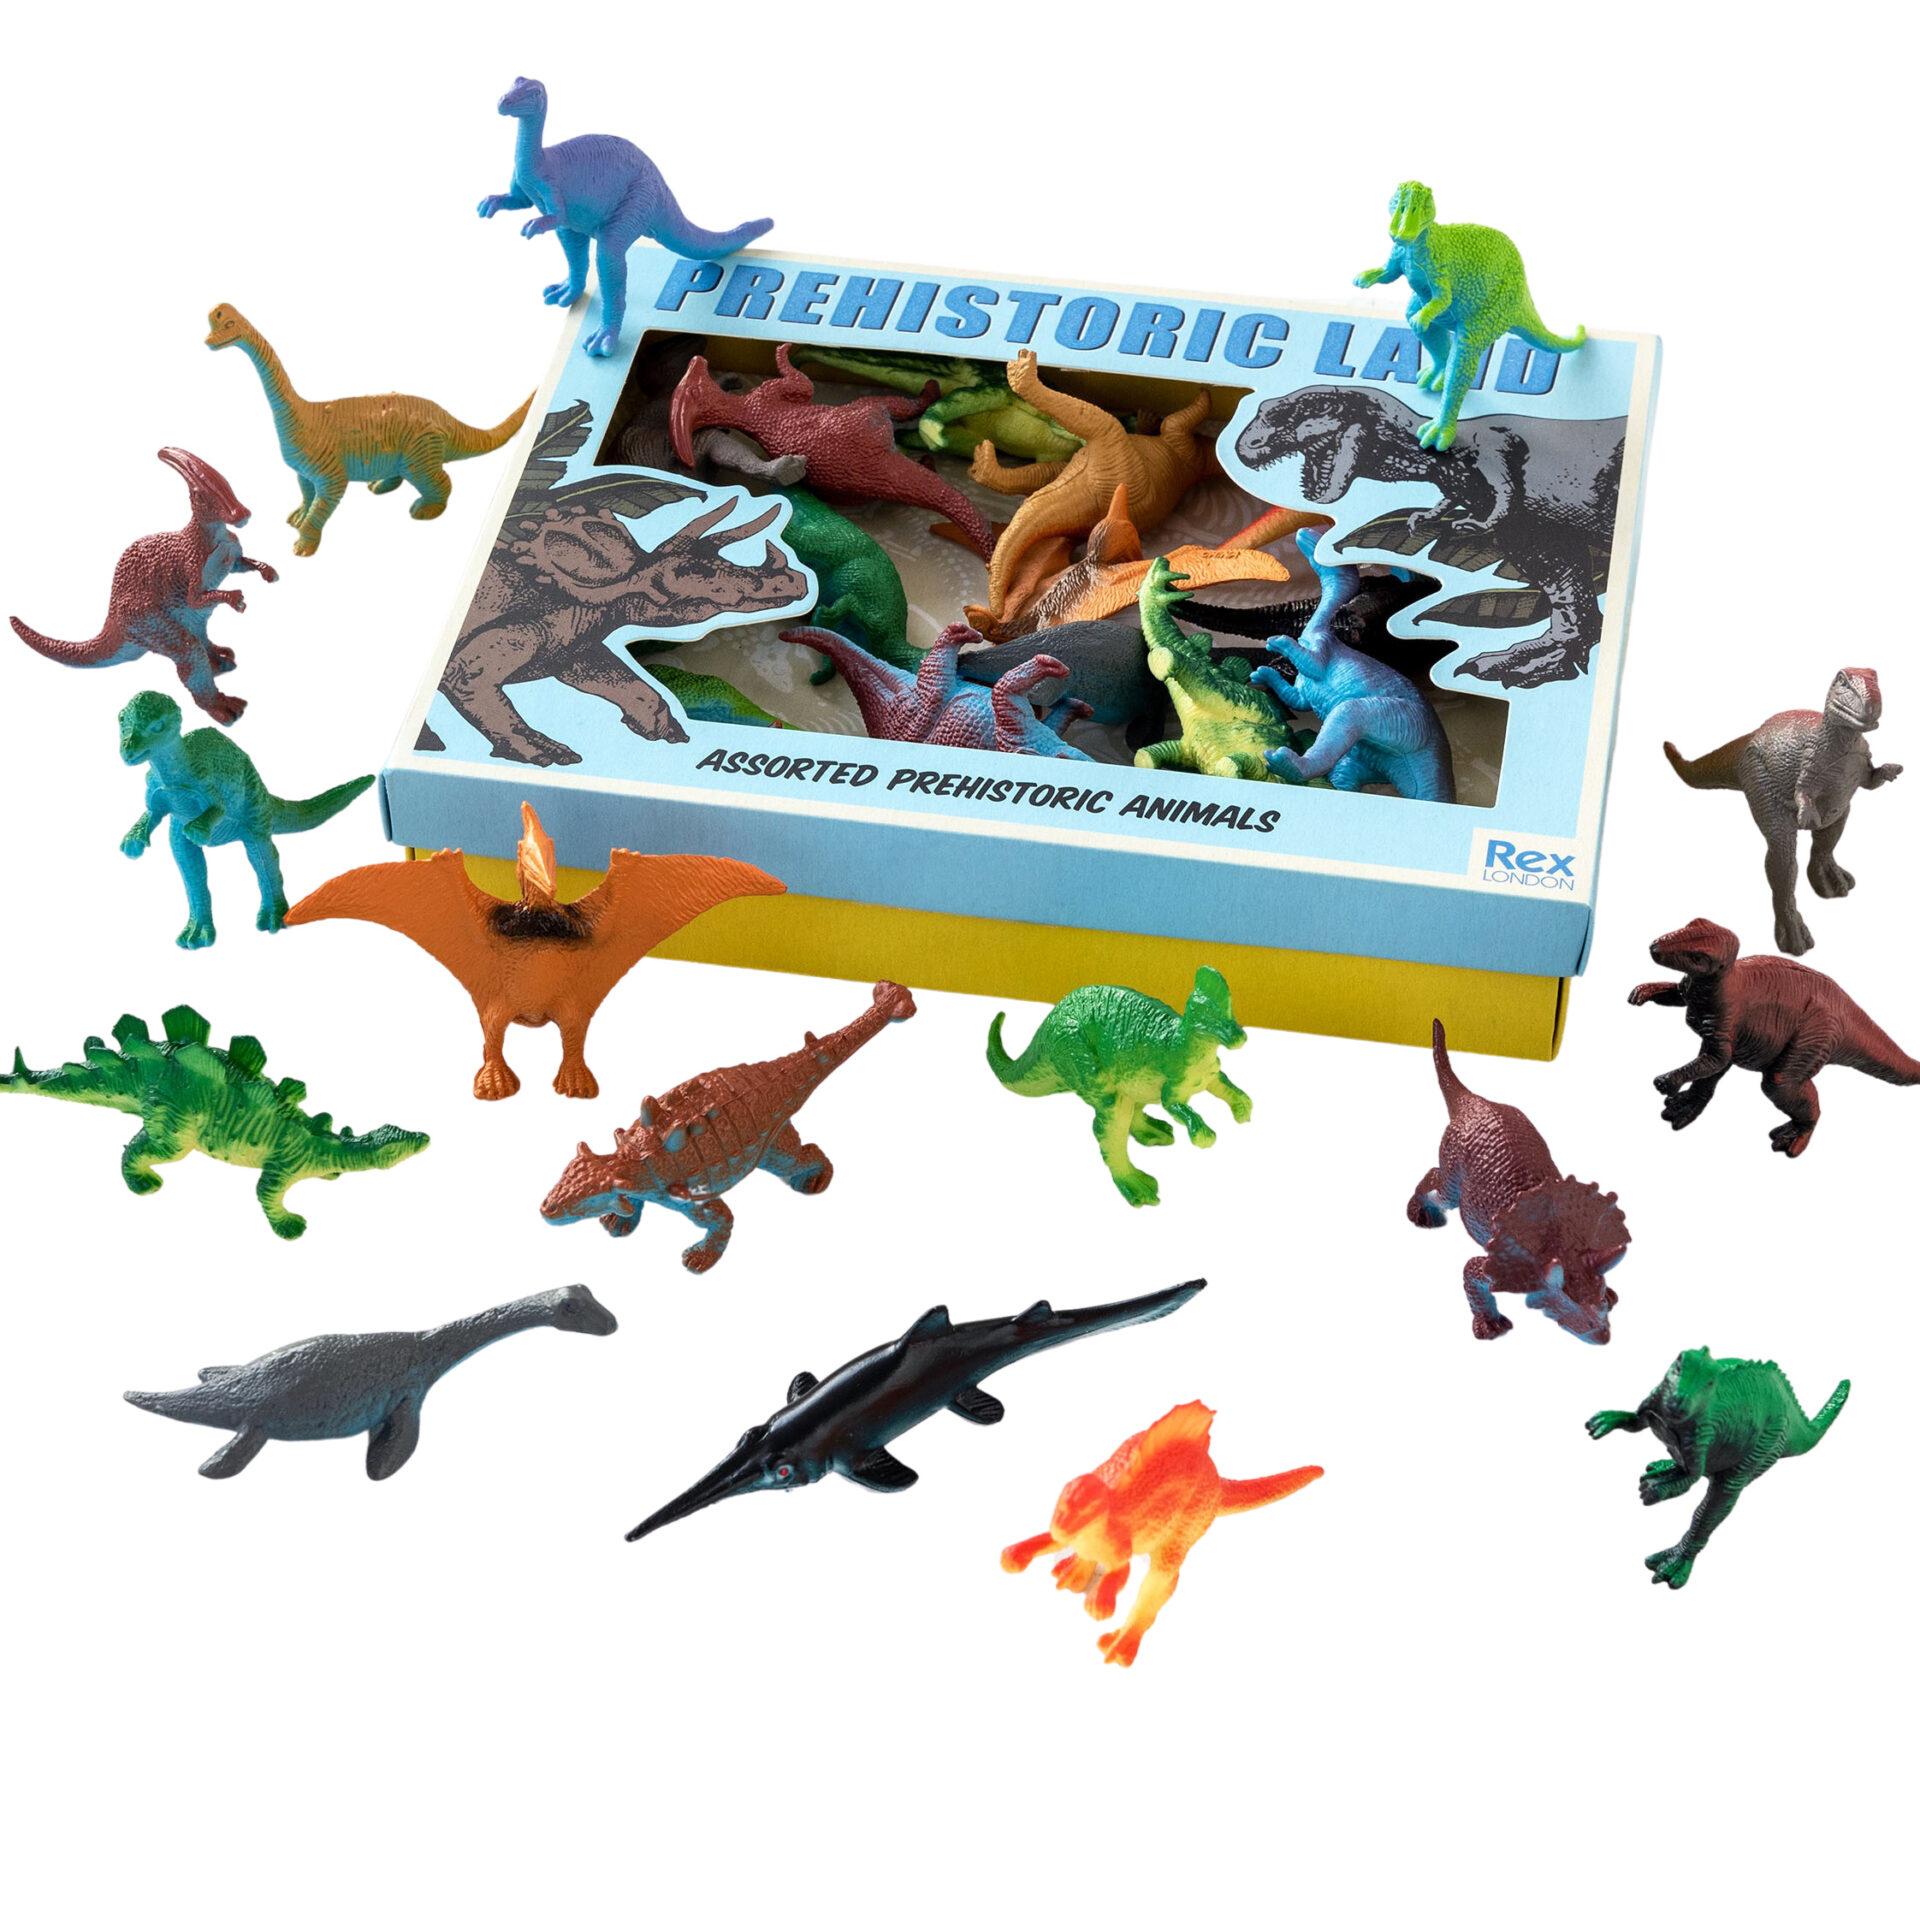 assorted prehistoric animals by rex